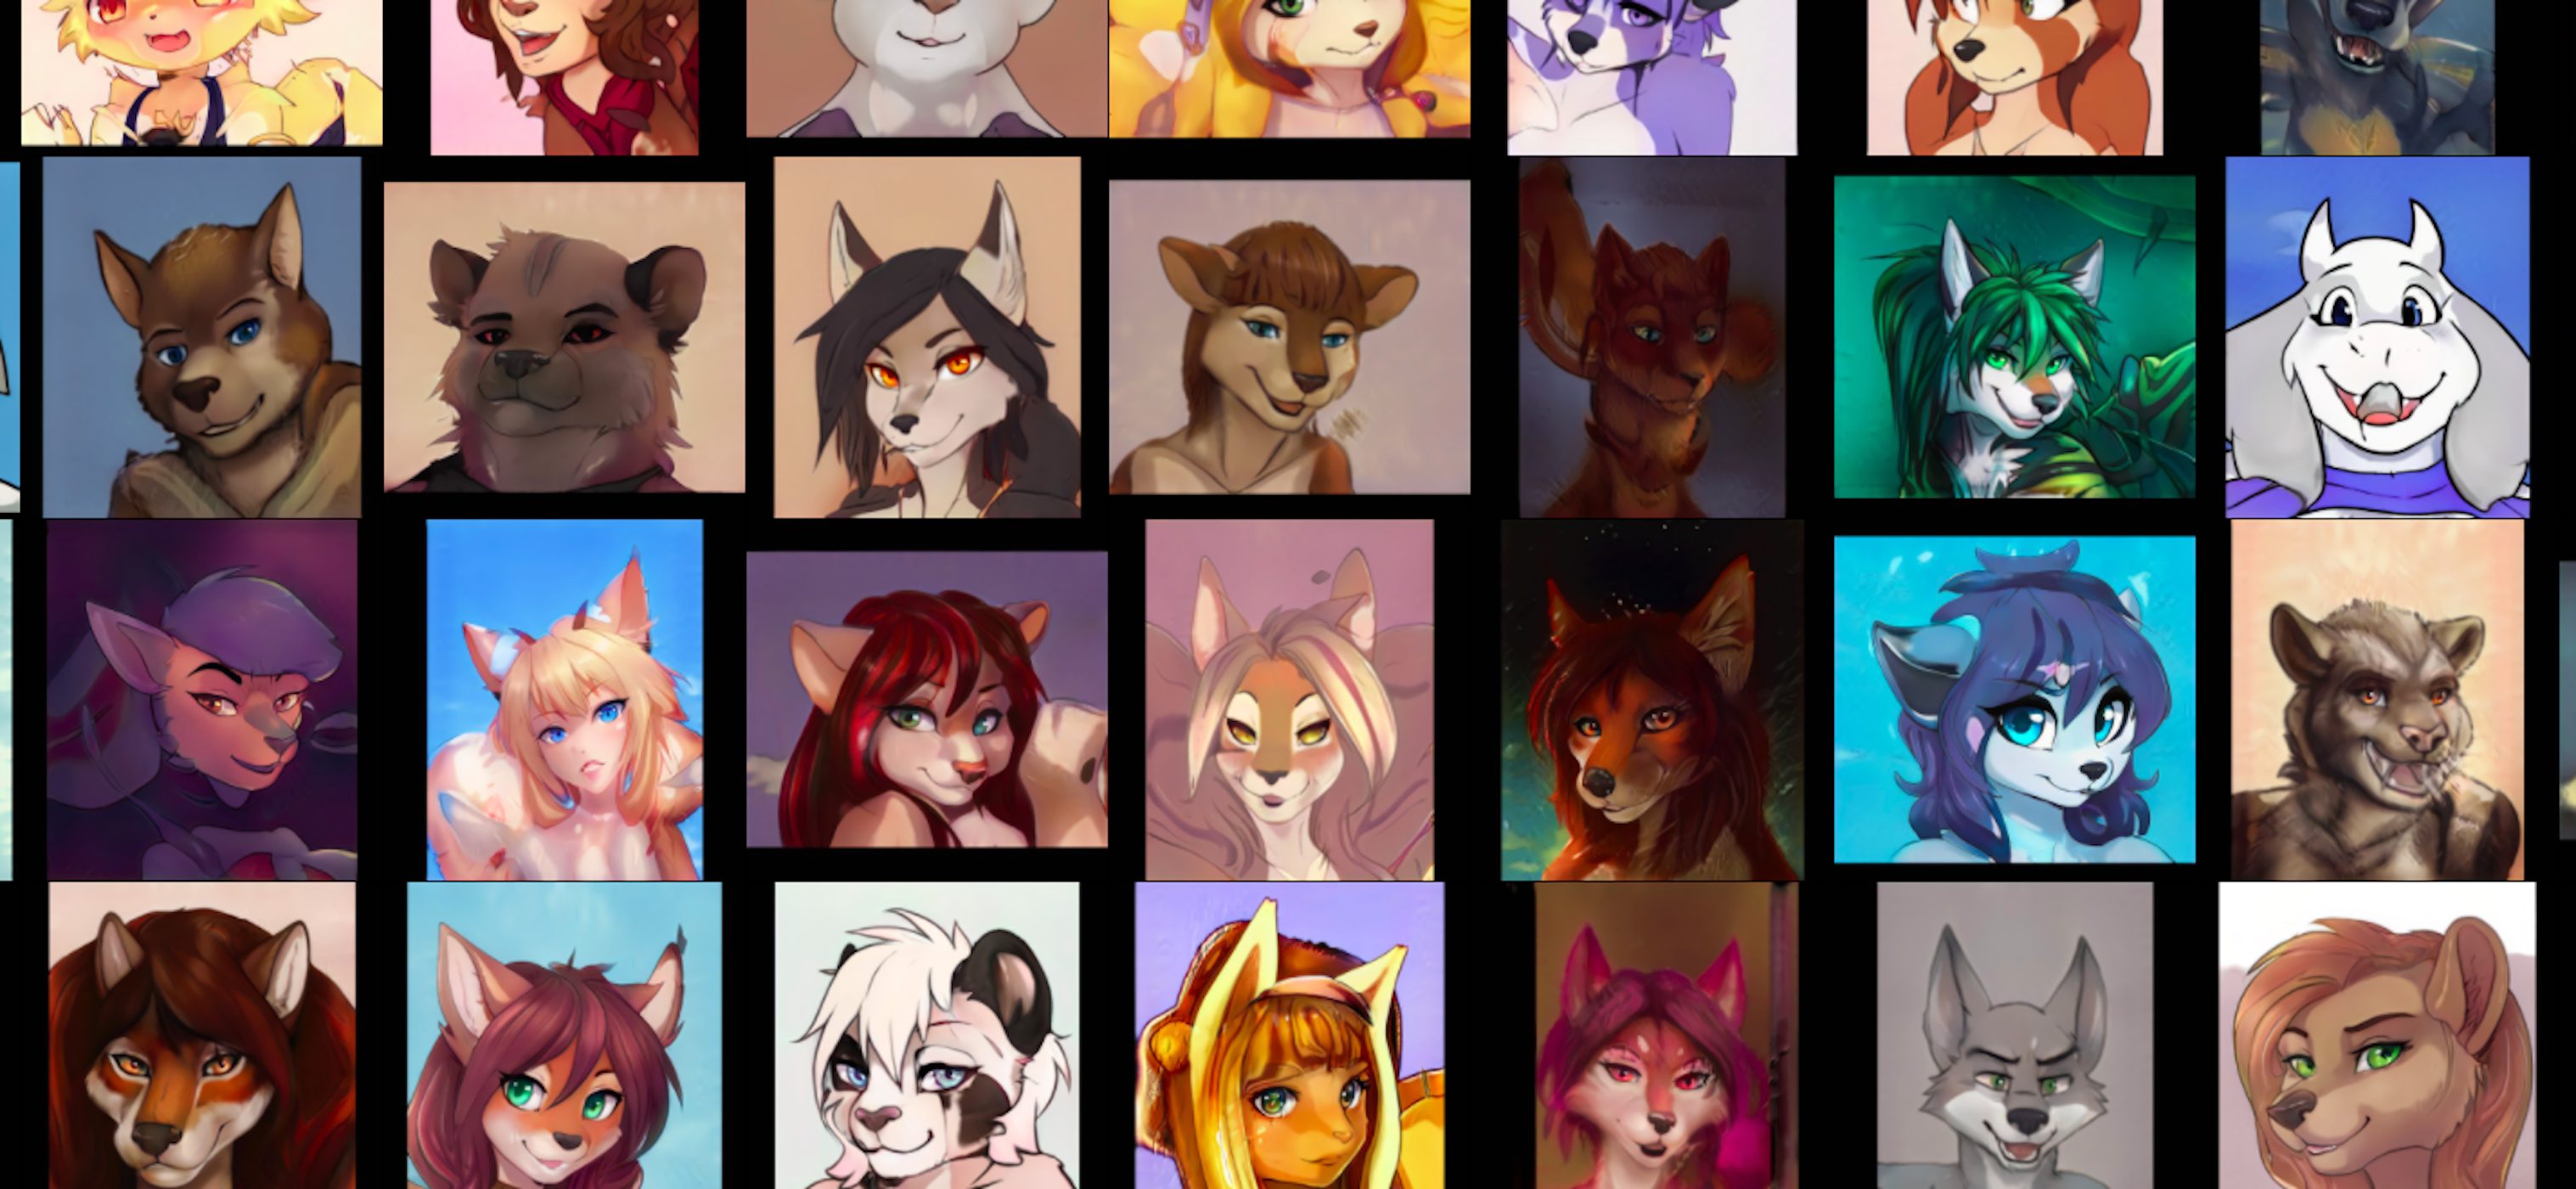 Furry Community Porn - This Furry Porn AI Generates a Sexual 'Hindquarters' Image Every 40 Seconds